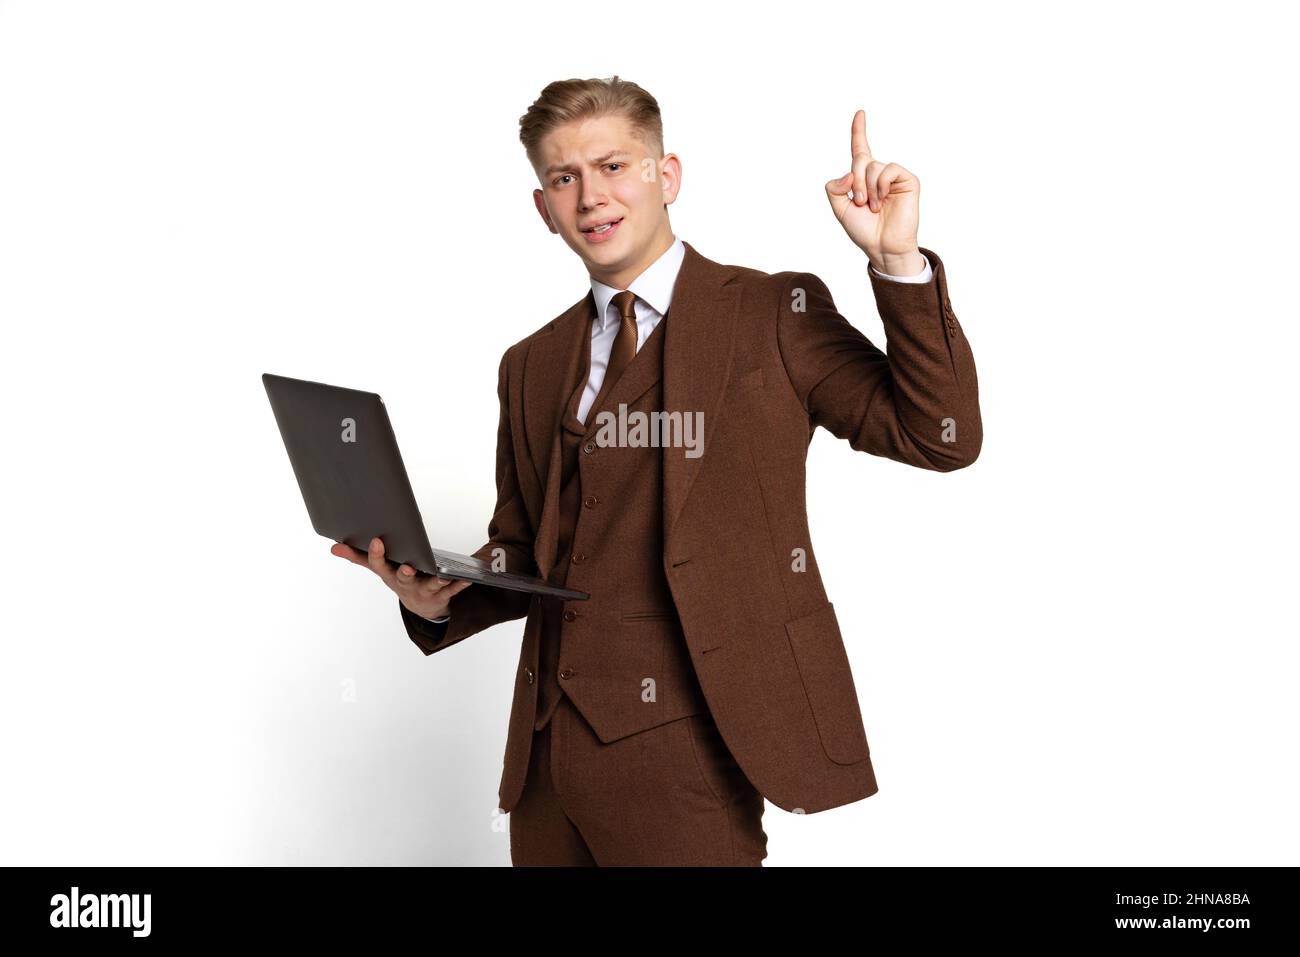 Man Wearing a Designer Clothes · Free Stock Photo